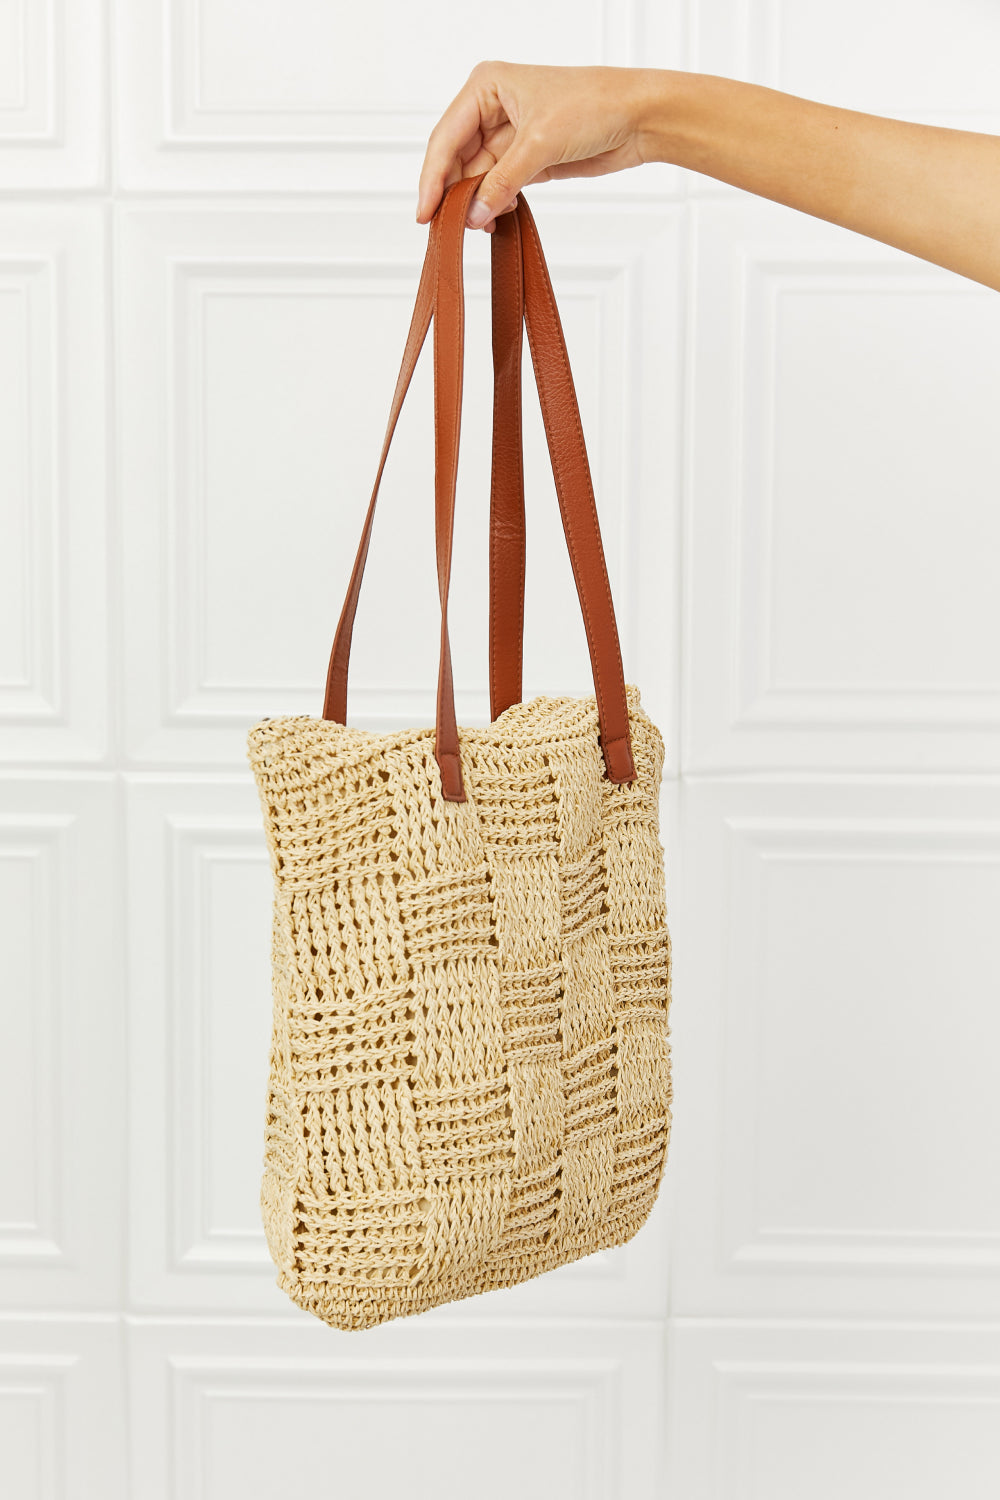 Fame Picnic Date Straw Tote Bag - BEAUTY COSMOTICS SHOP